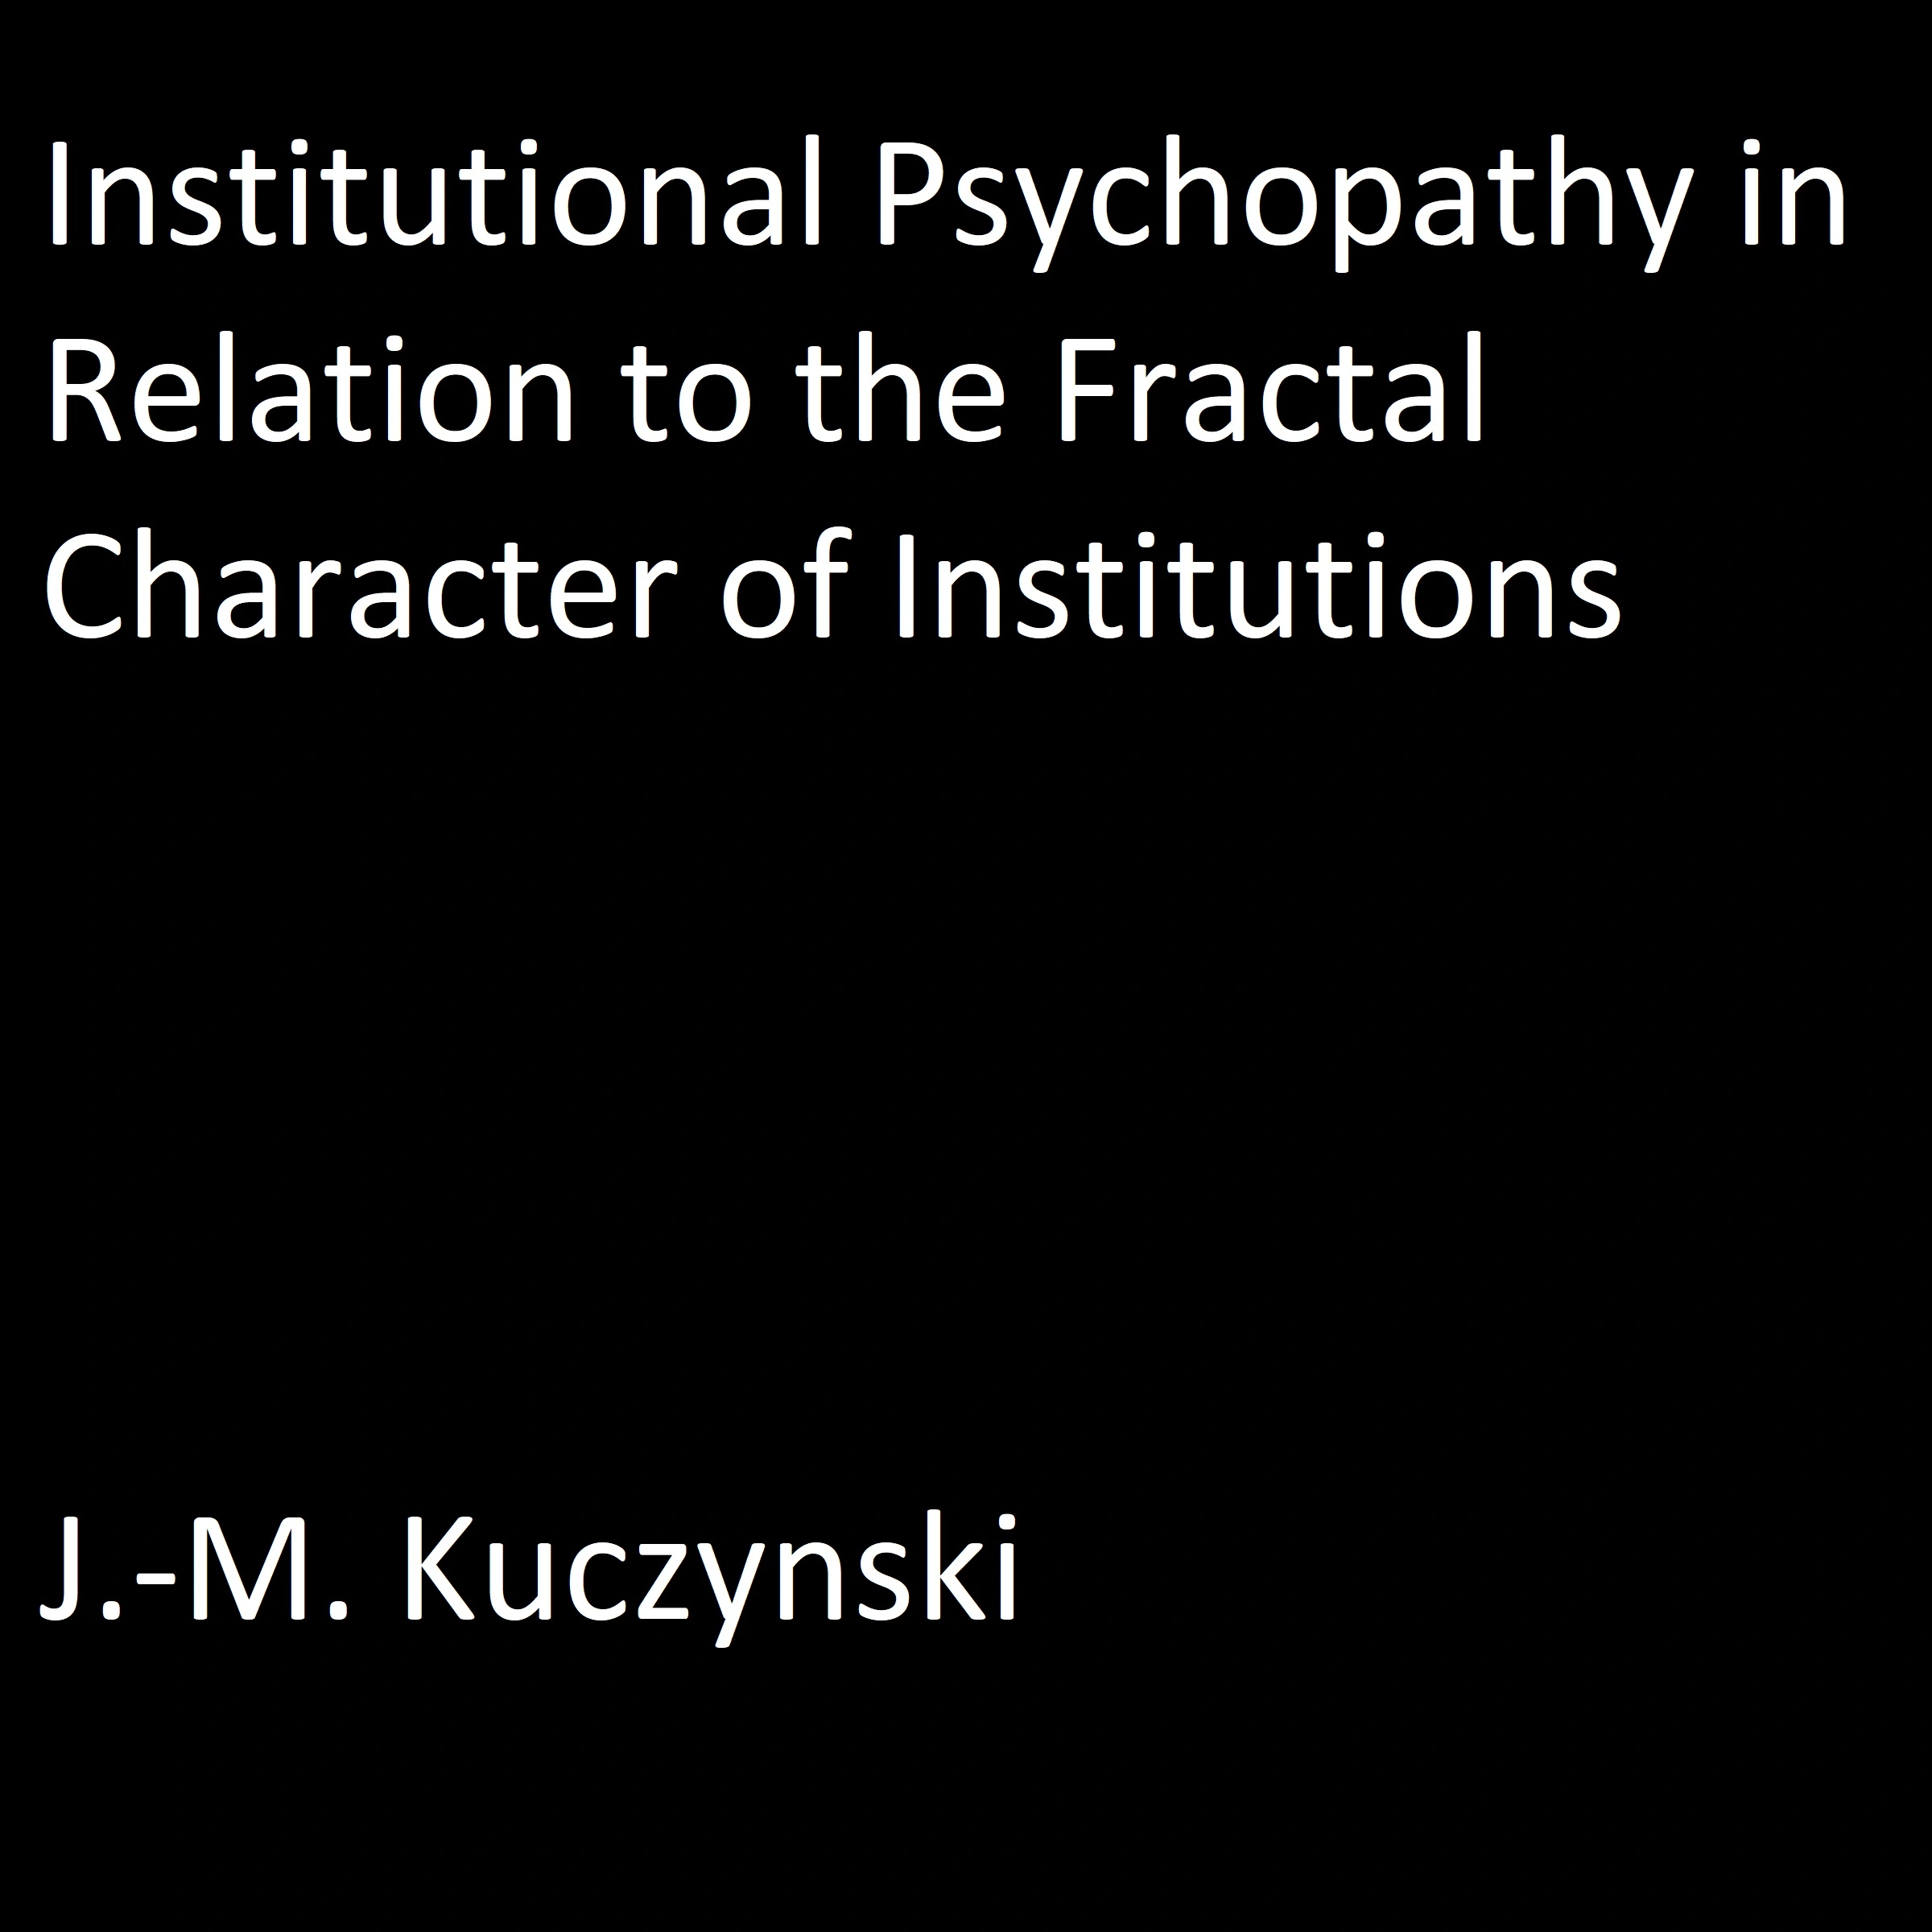 Institutional Psychopathy in Relation to the Fractal Character of Institutions Audiobook by J.-M. Kuczynski